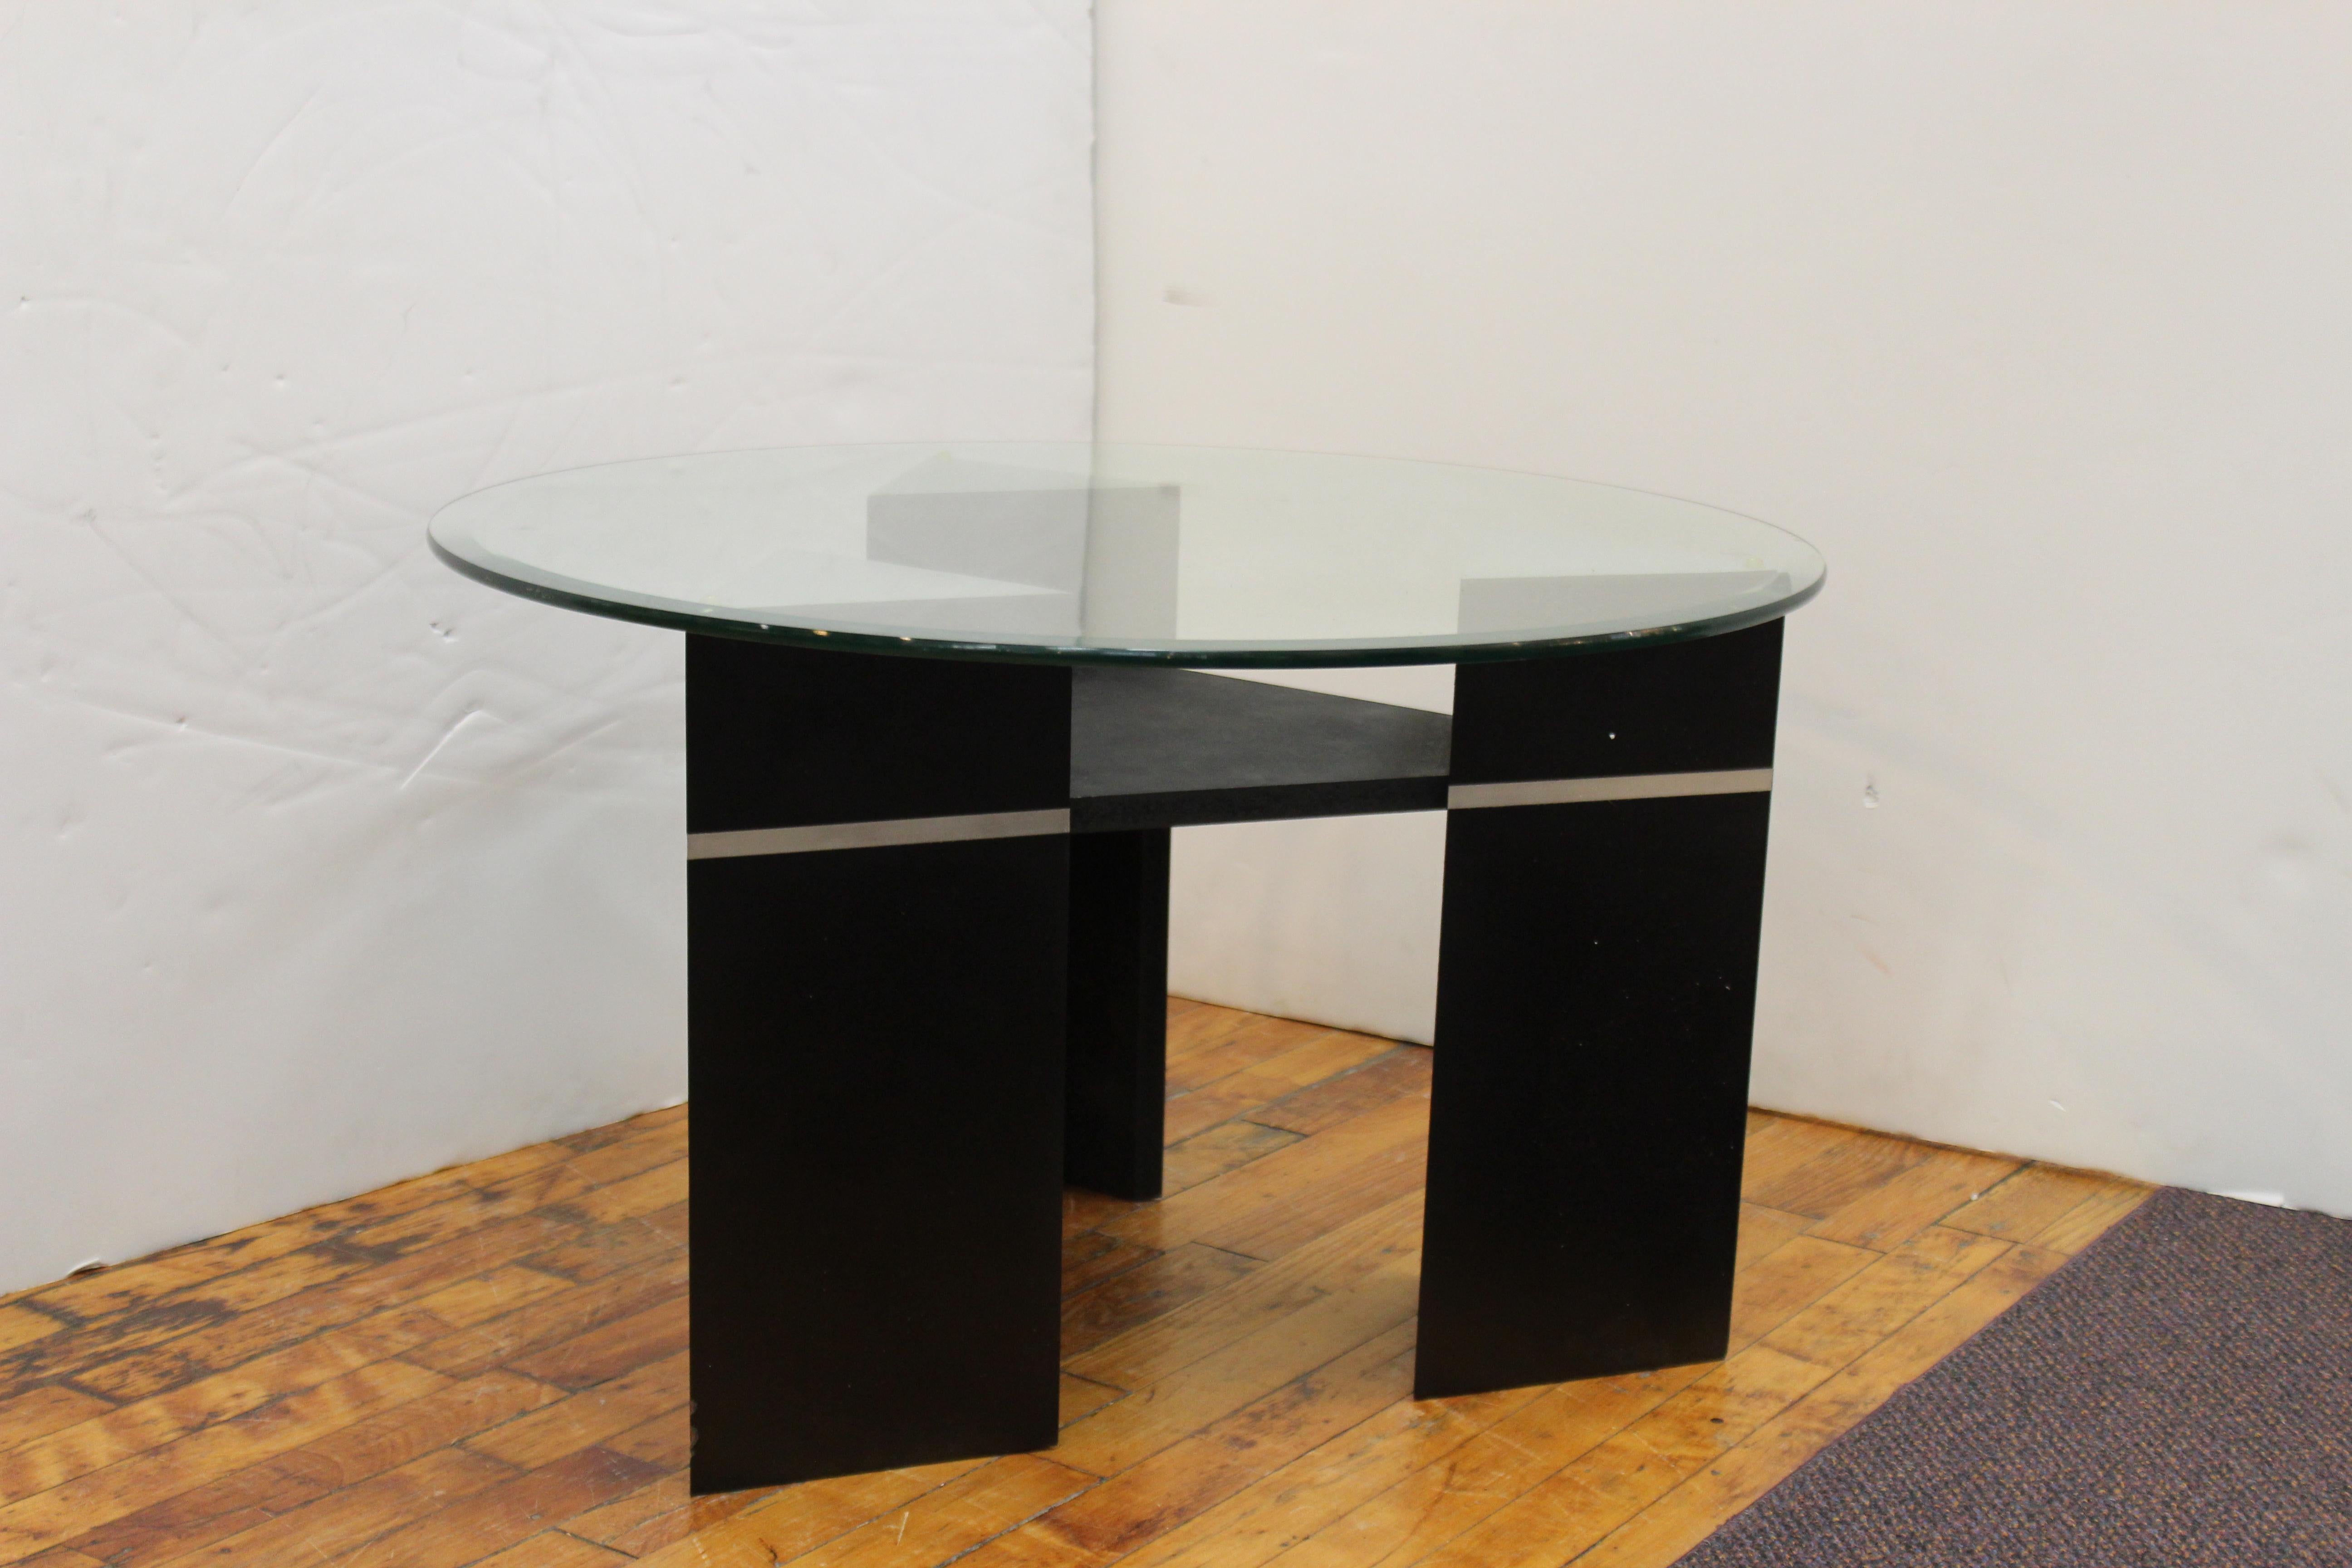 Postmodern side table or coffee table in triangular shape with a round glass top. The piece has three triangular shaped legs and is painted in black with silver embellishments. Likely a custom design made in the late 20th century. In great vintage